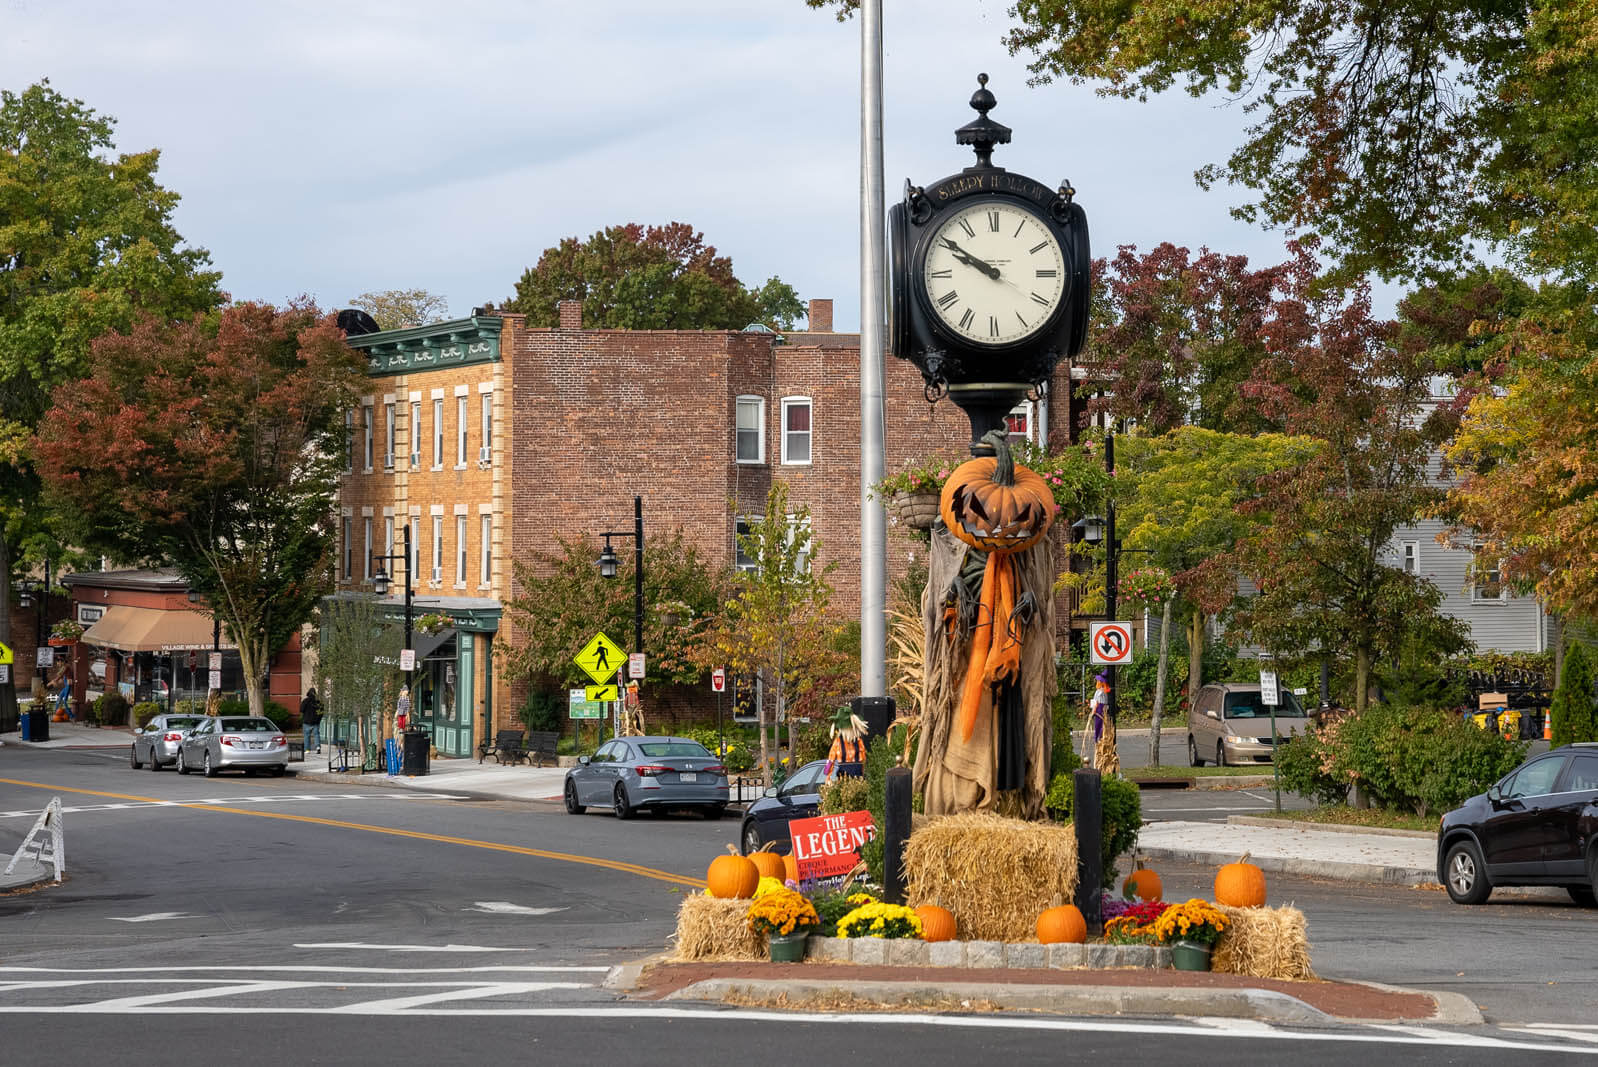 Downtown Sleepy Hollow New York on Beekman Avenue in Westchester County